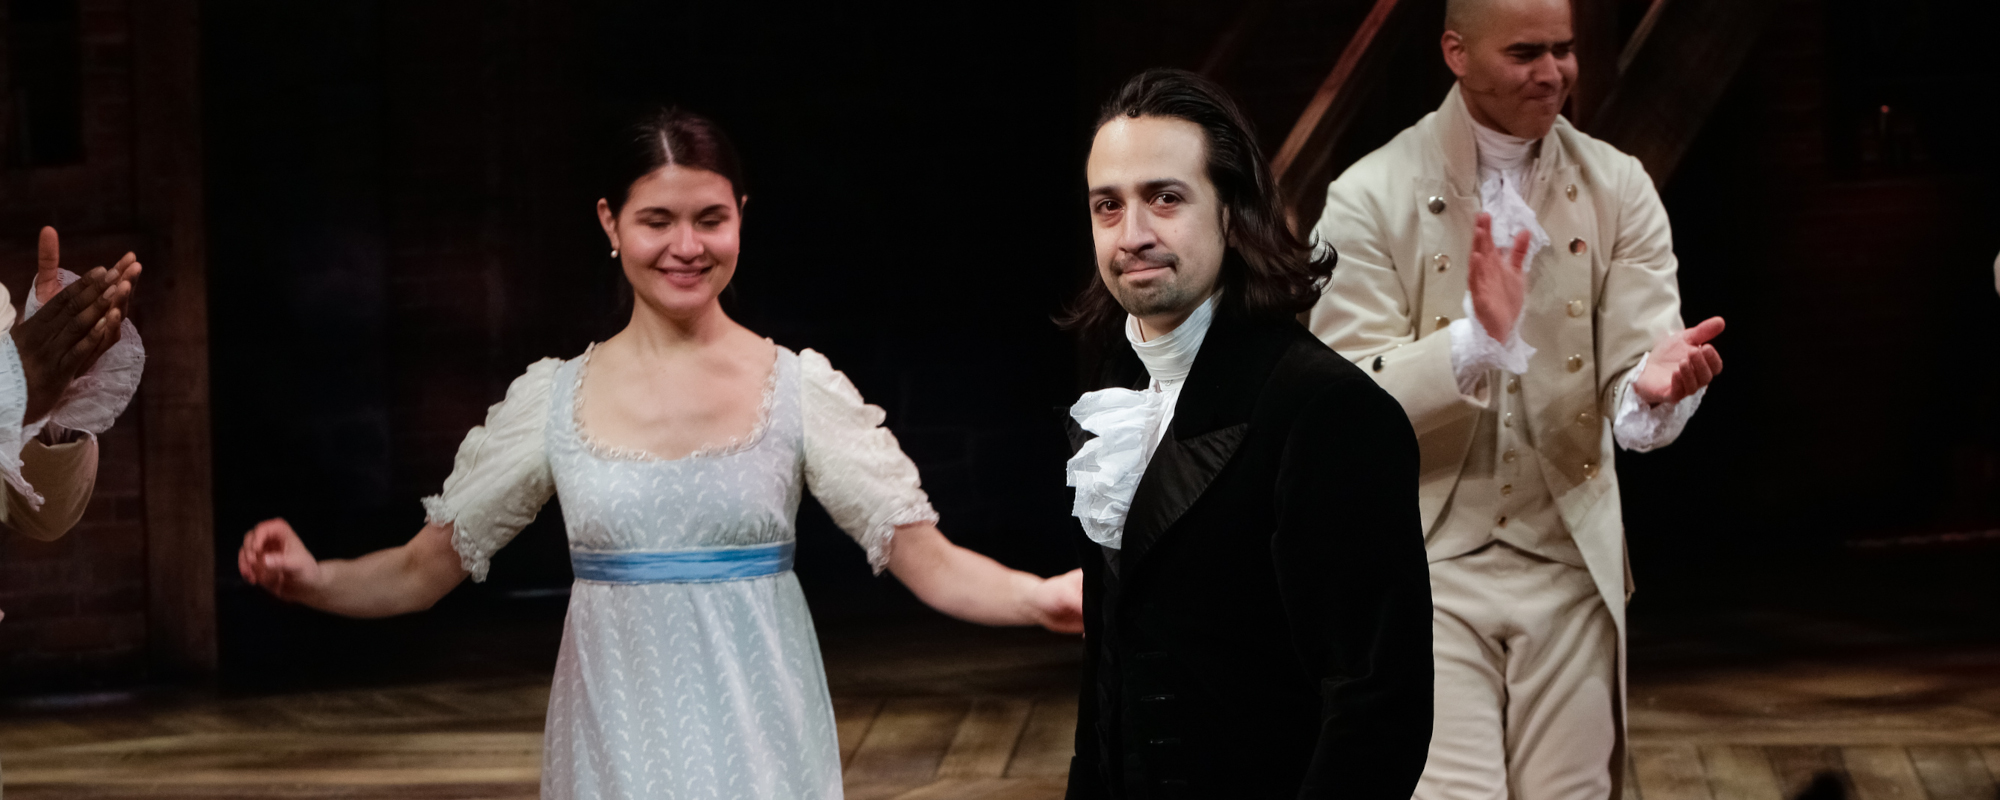 Behind the Historical Meaning of ‘Hamilton’s’ “My Shot” by Lin-Manuel Miranda